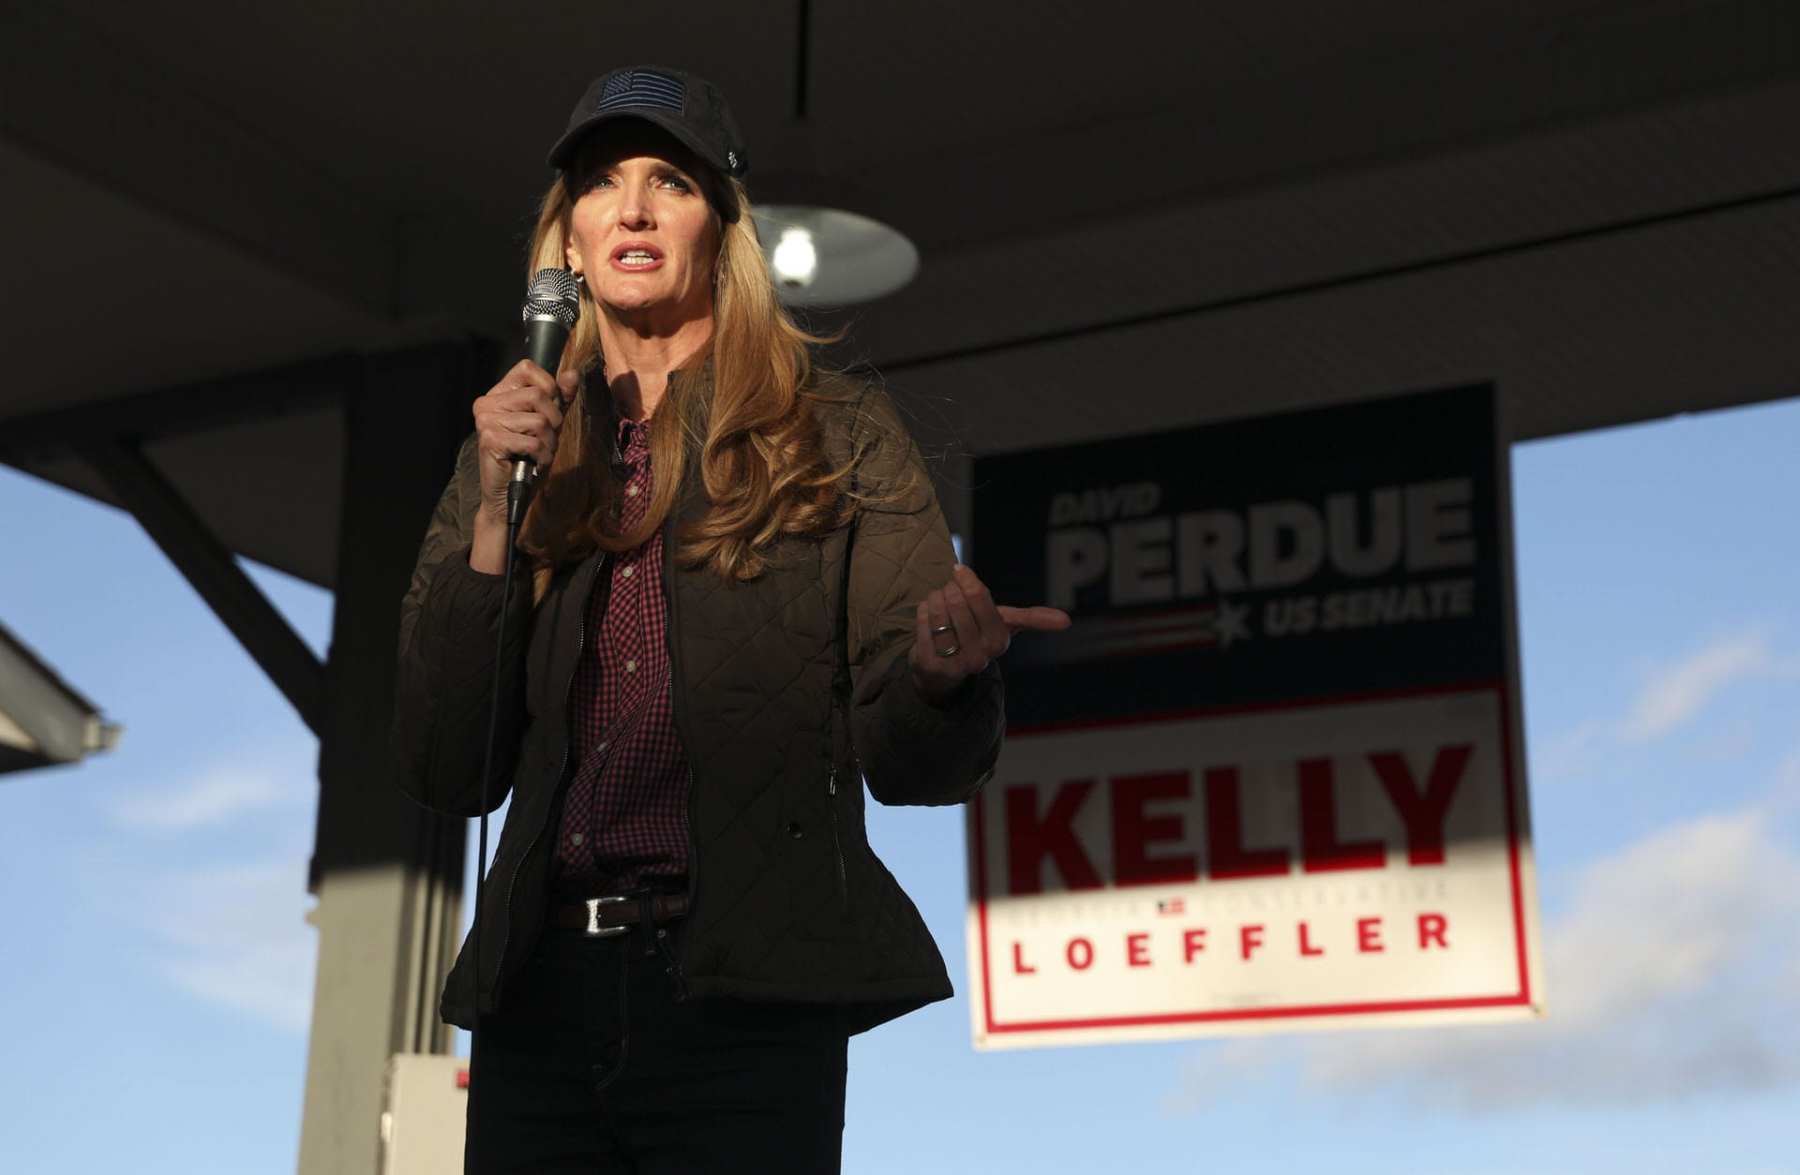 Senator Kelly Loeffler speaks to supporters during a rally.